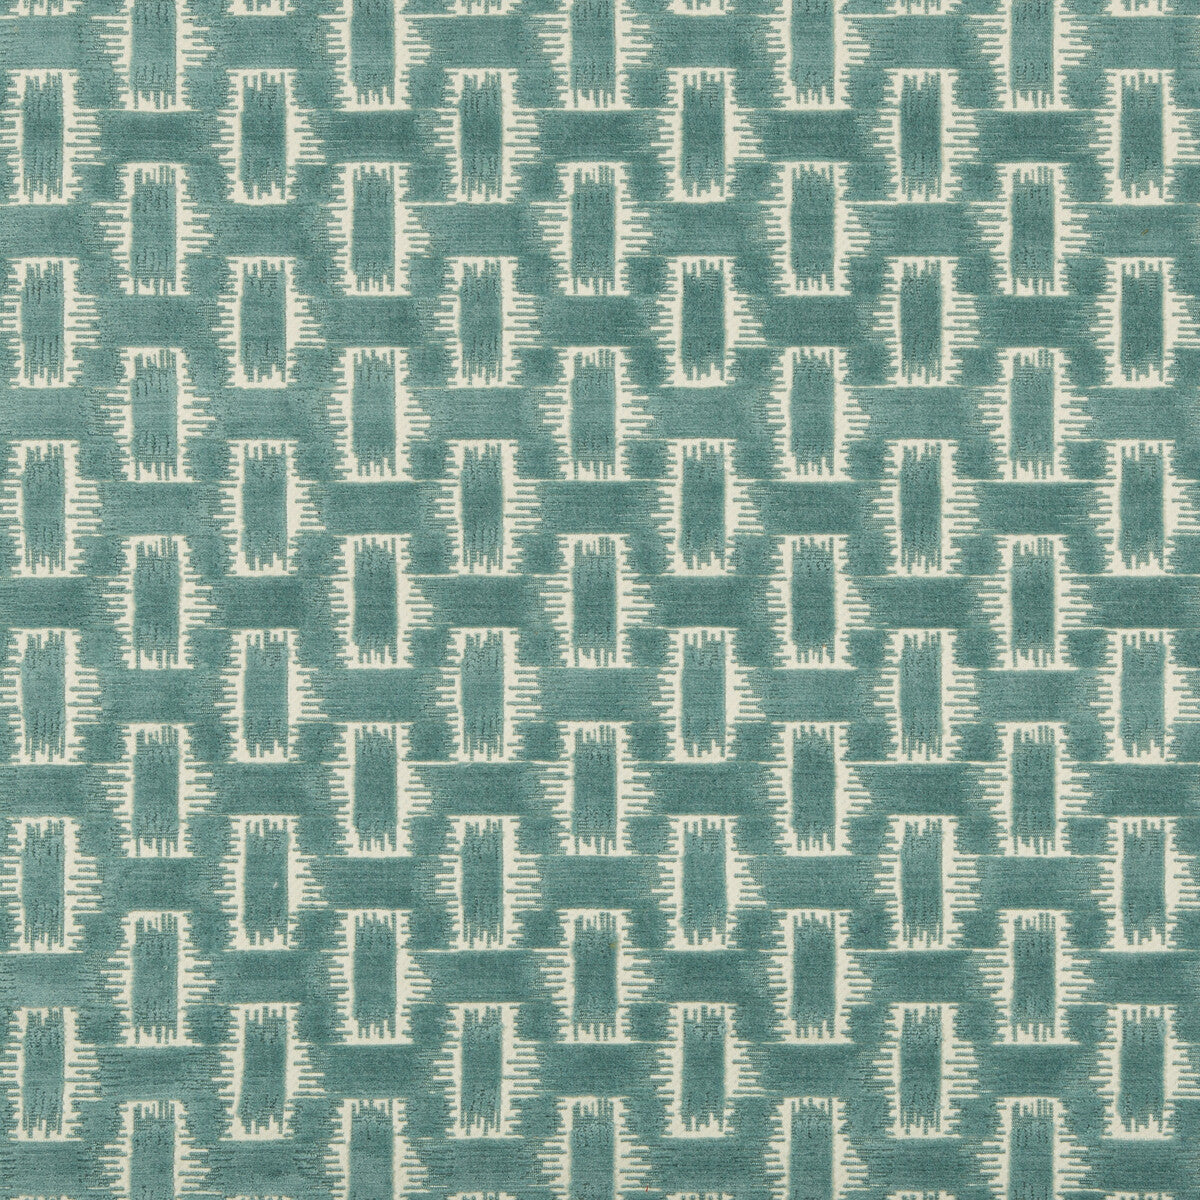 Chambord Velvet fabric in aqua color - pattern 8020116.13.0 - by Brunschwig &amp; Fils in the Chaumont Velvets collection